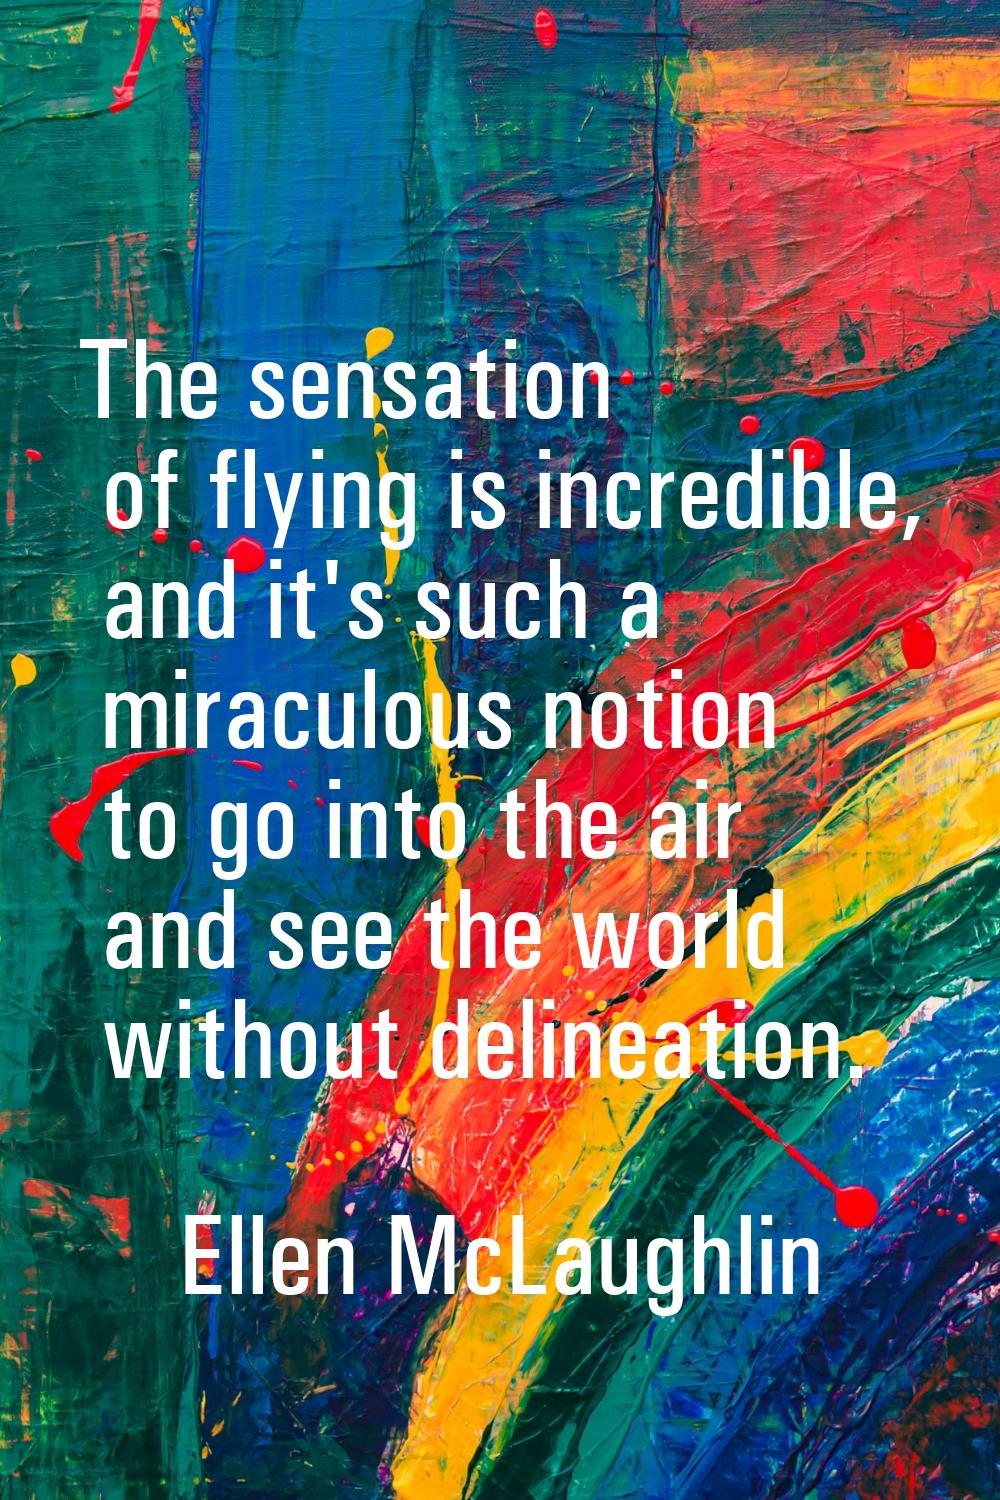 The sensation of flying is incredible, and it's such a miraculous notion to go into the air and see